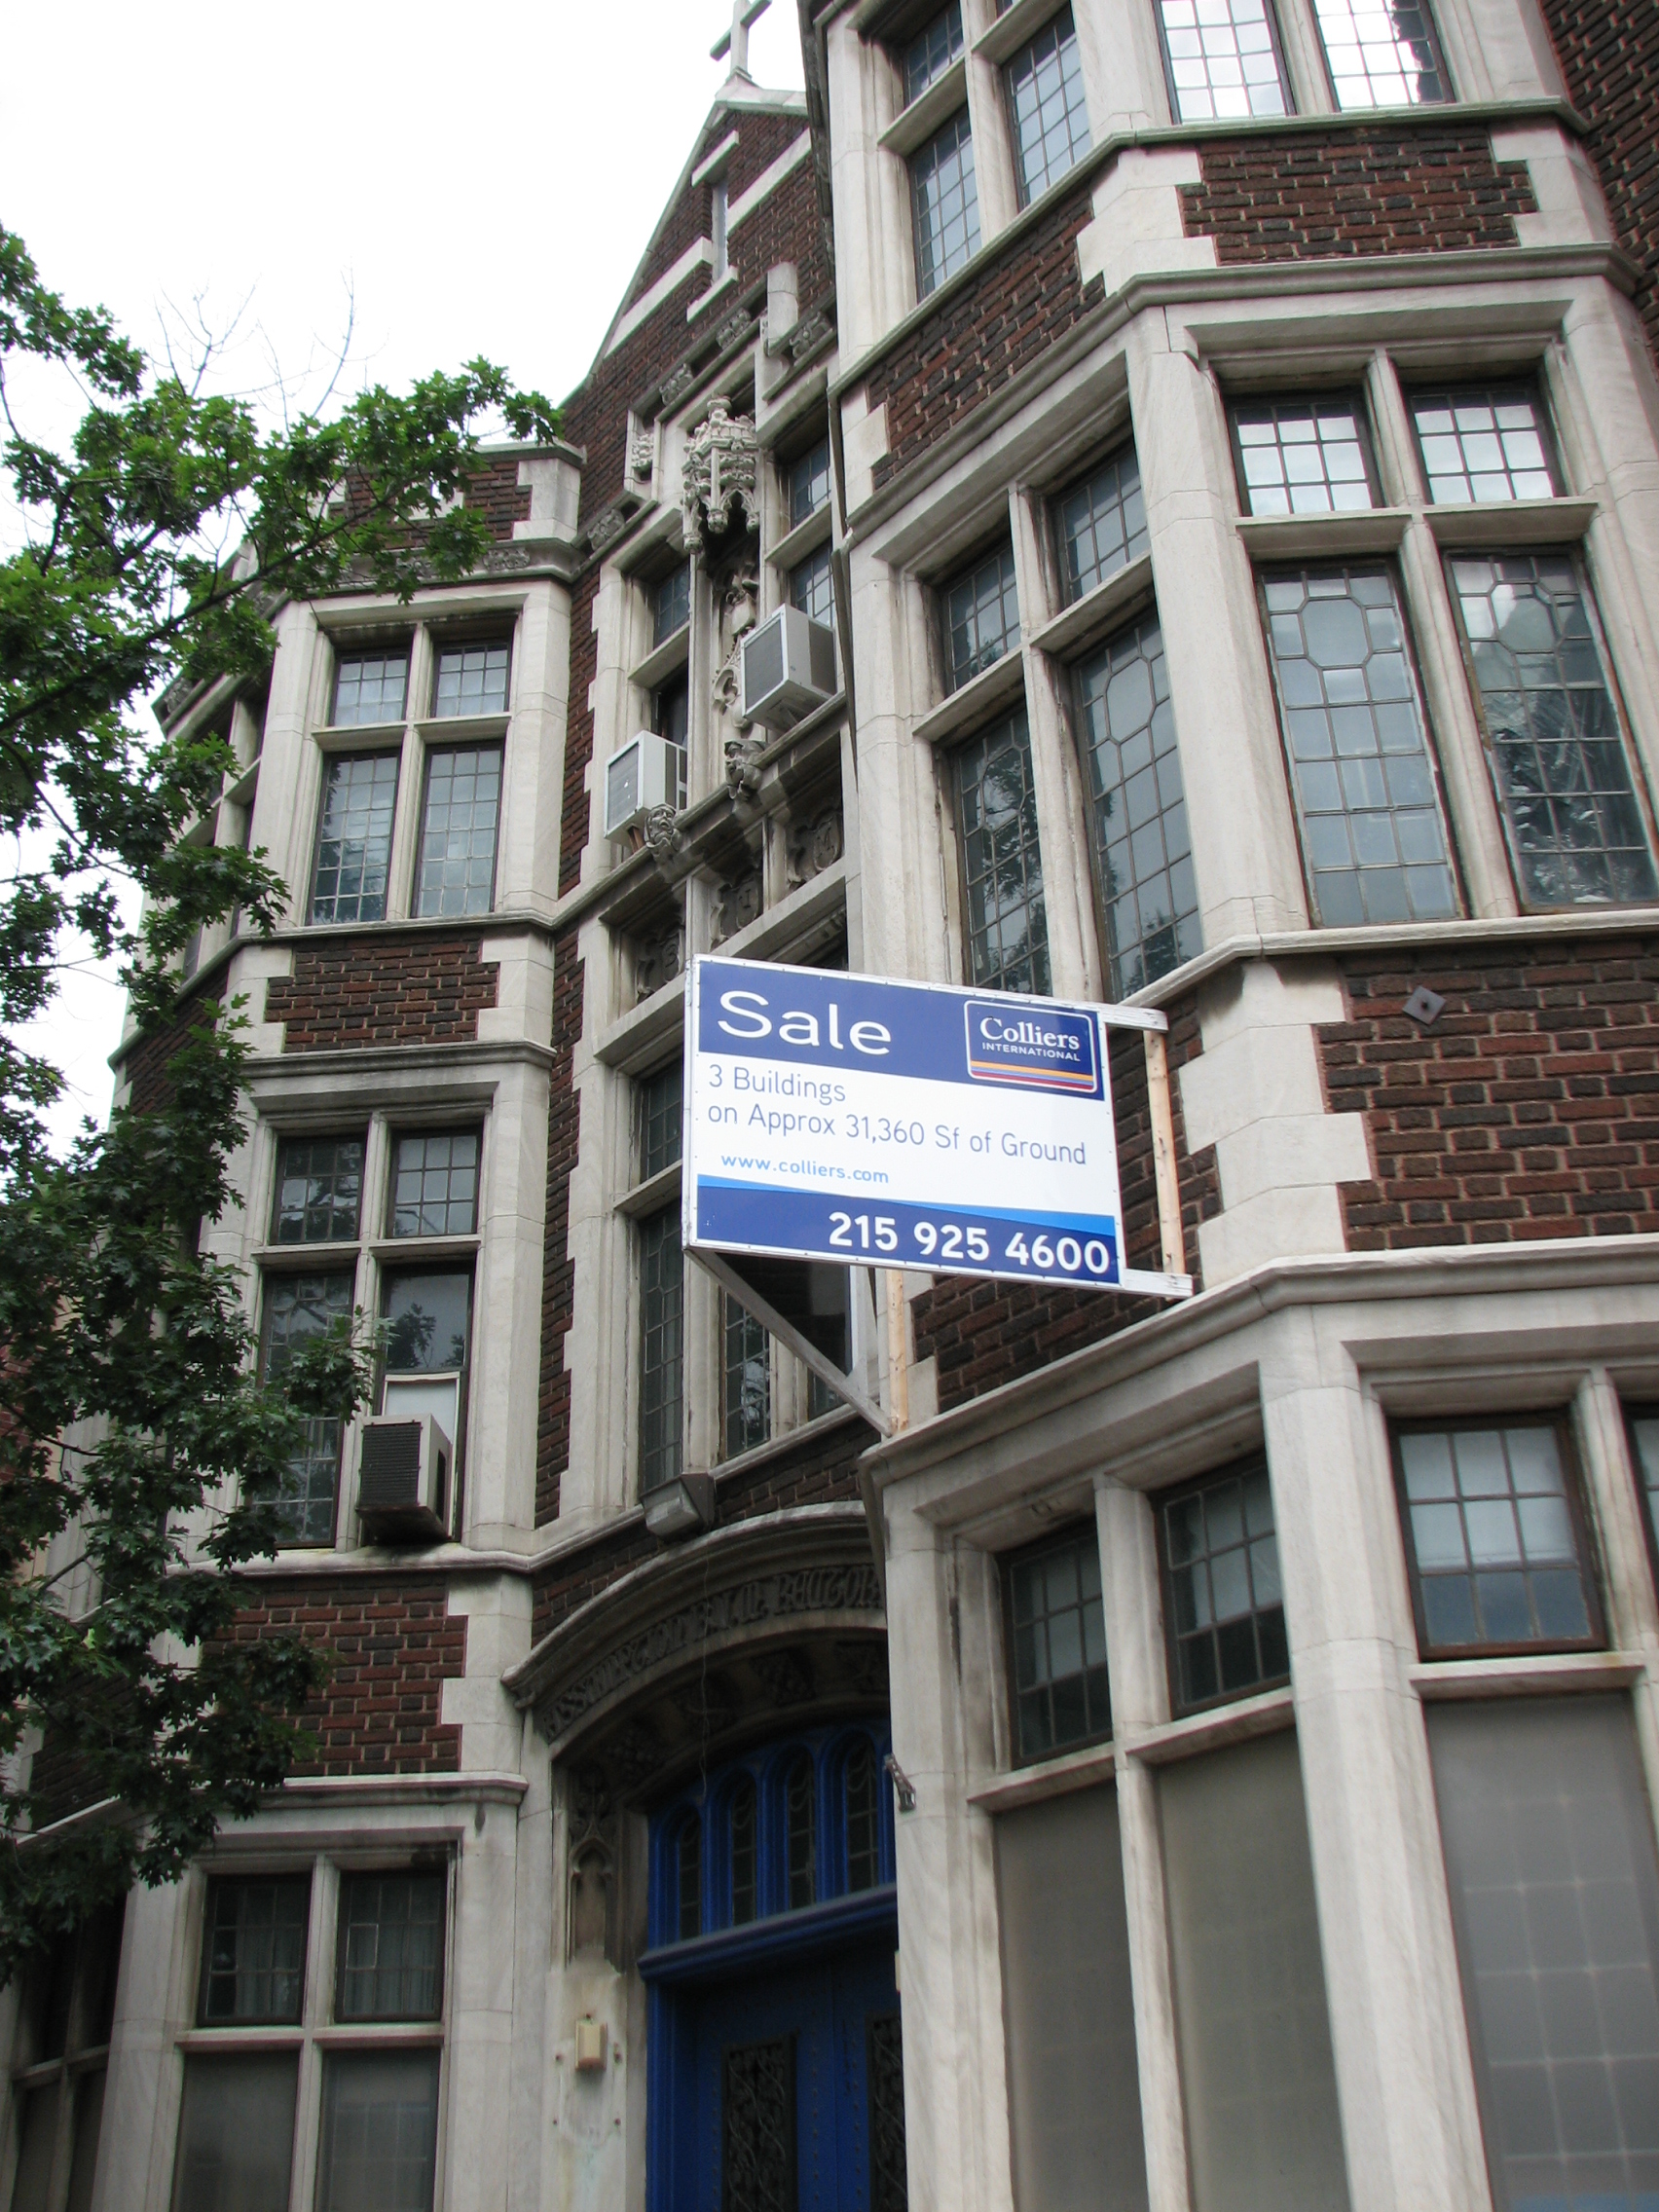 “Sale” signs are still posted on the church and school, two weeks after the property was sold.